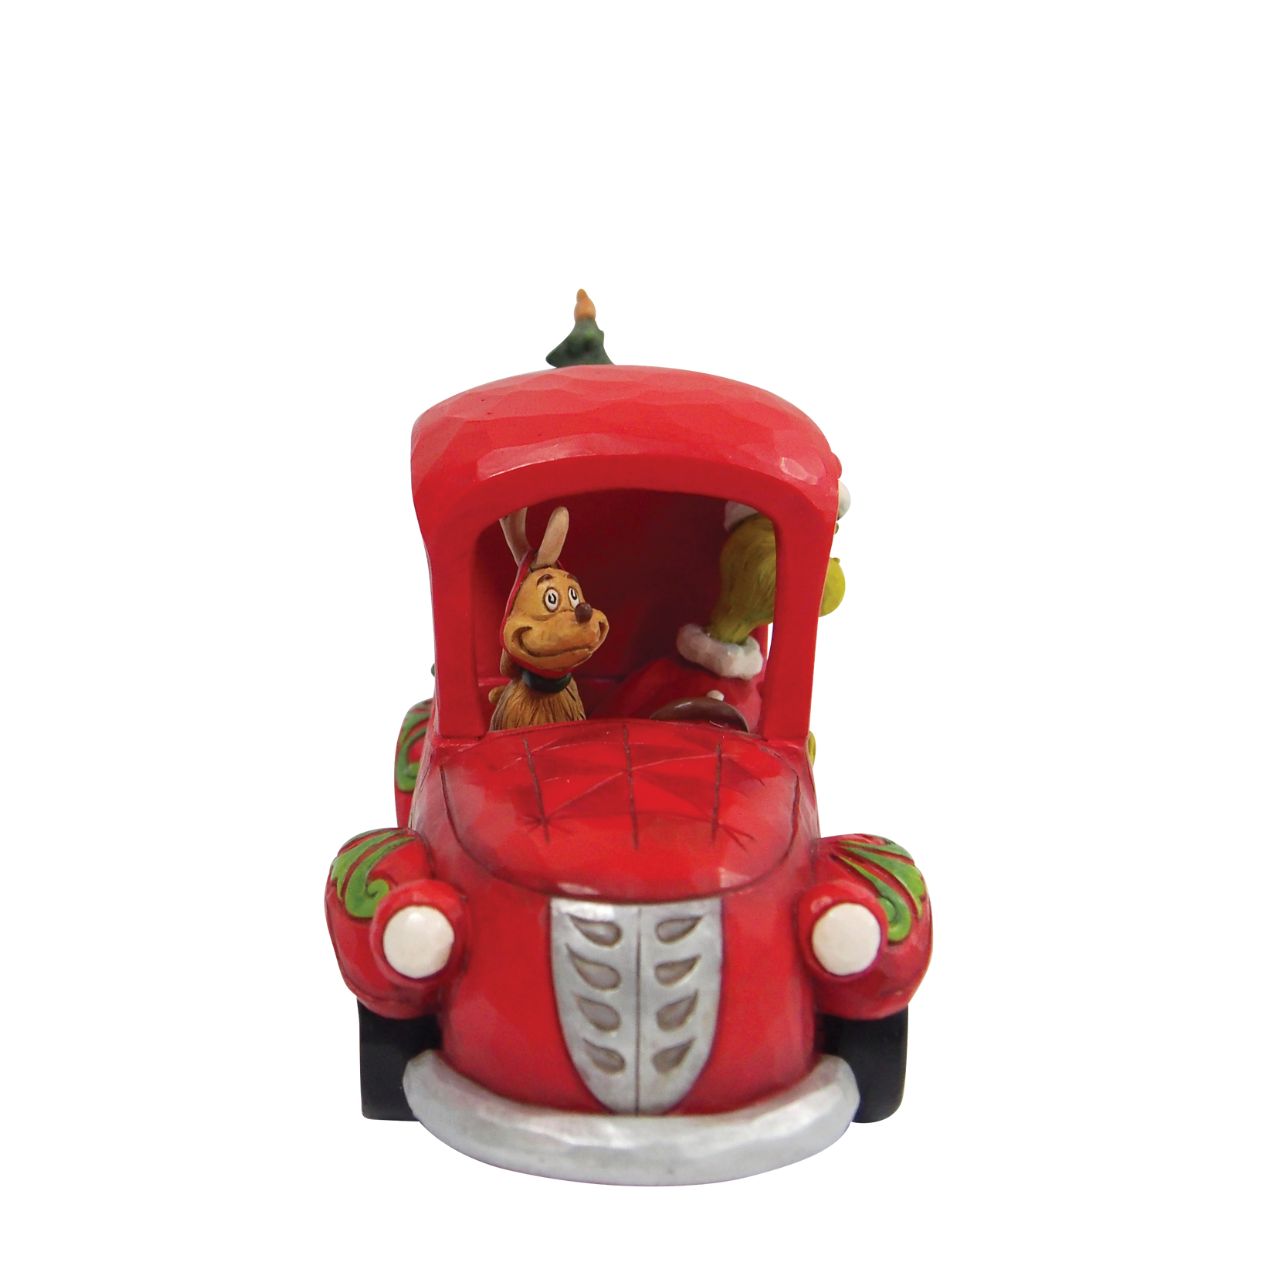 Grinch in Red Truck Figurine by Jim Shore  The Grinch gives Max a break in this sweet Jim Shore statuette. Driving a holly brimmed red truck, The Grinch brings tidings of joy and mischief to Whoville. Cindy Lou-Who is along for the ride as she smiles brightly from the truck bed.